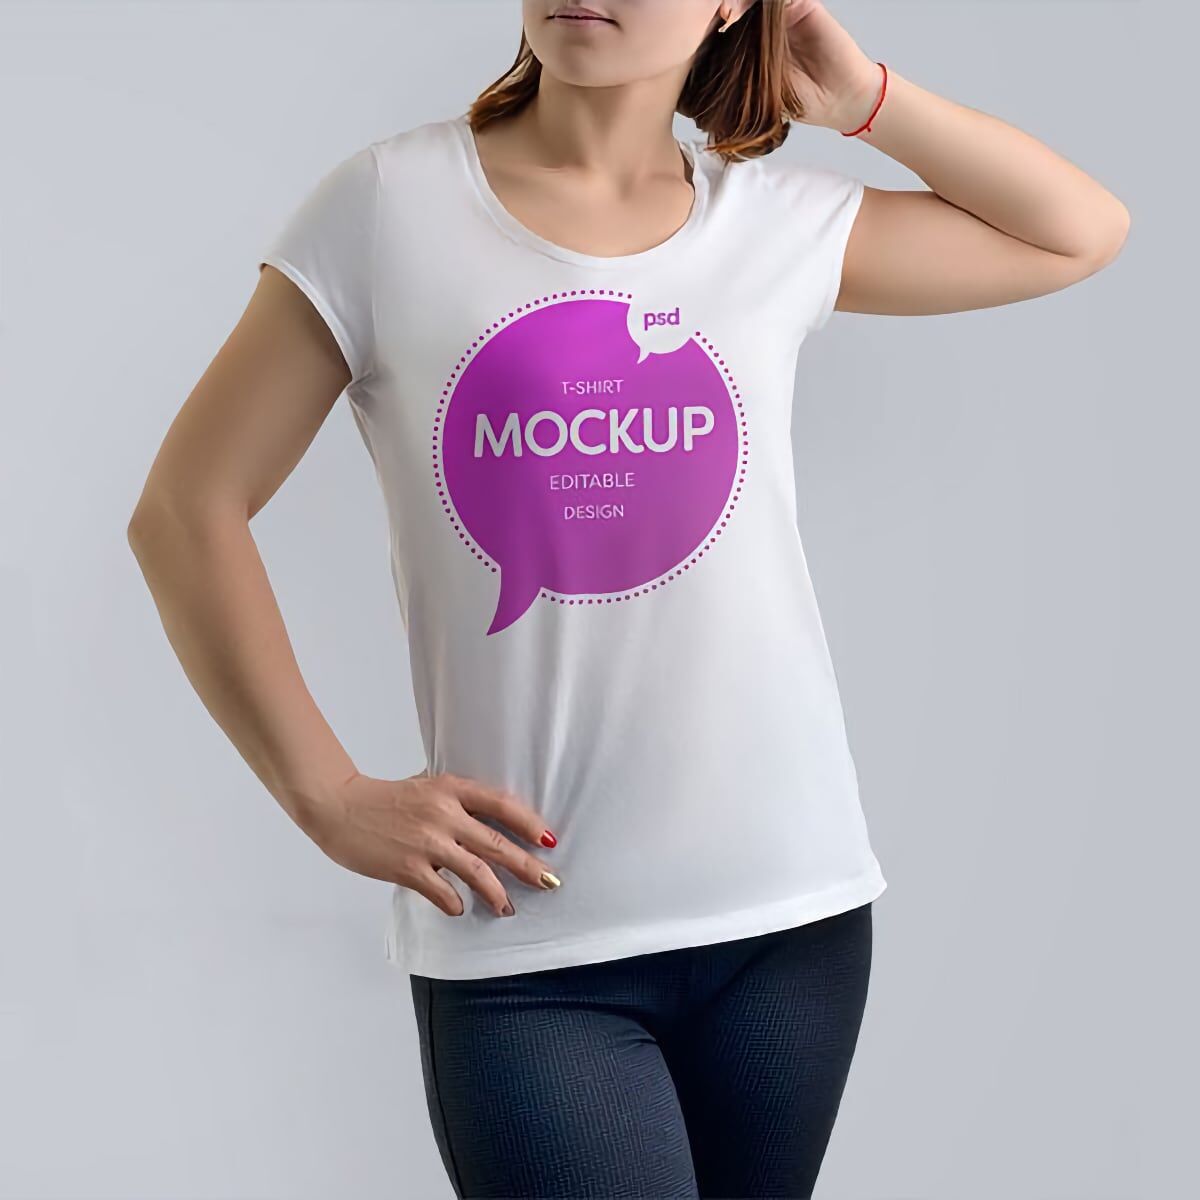 Women's T-shirts with prints